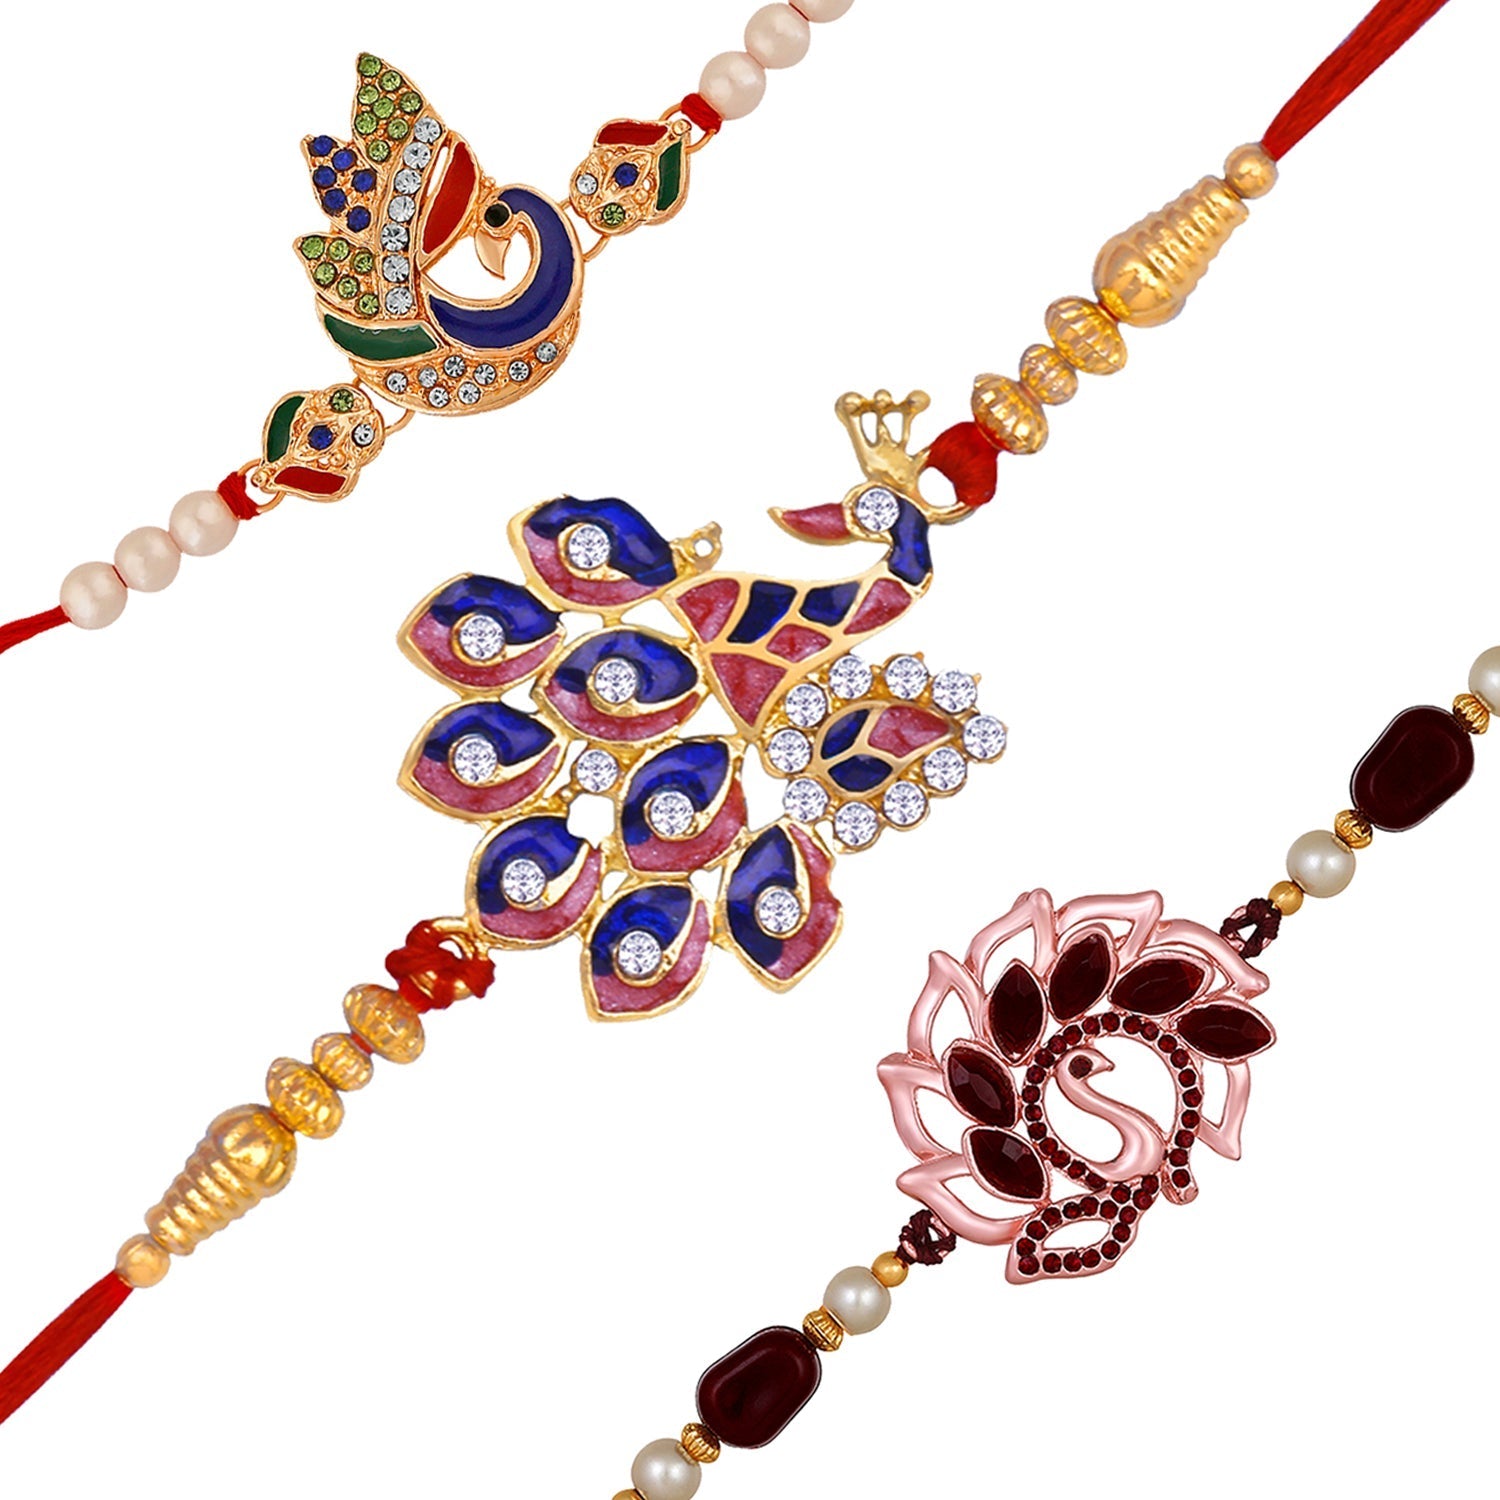 Mahi Combo of 3 Charming Peacock Shaped Rakhis with Meenakari Work and Crystals for Brothers (RCO1105534M)